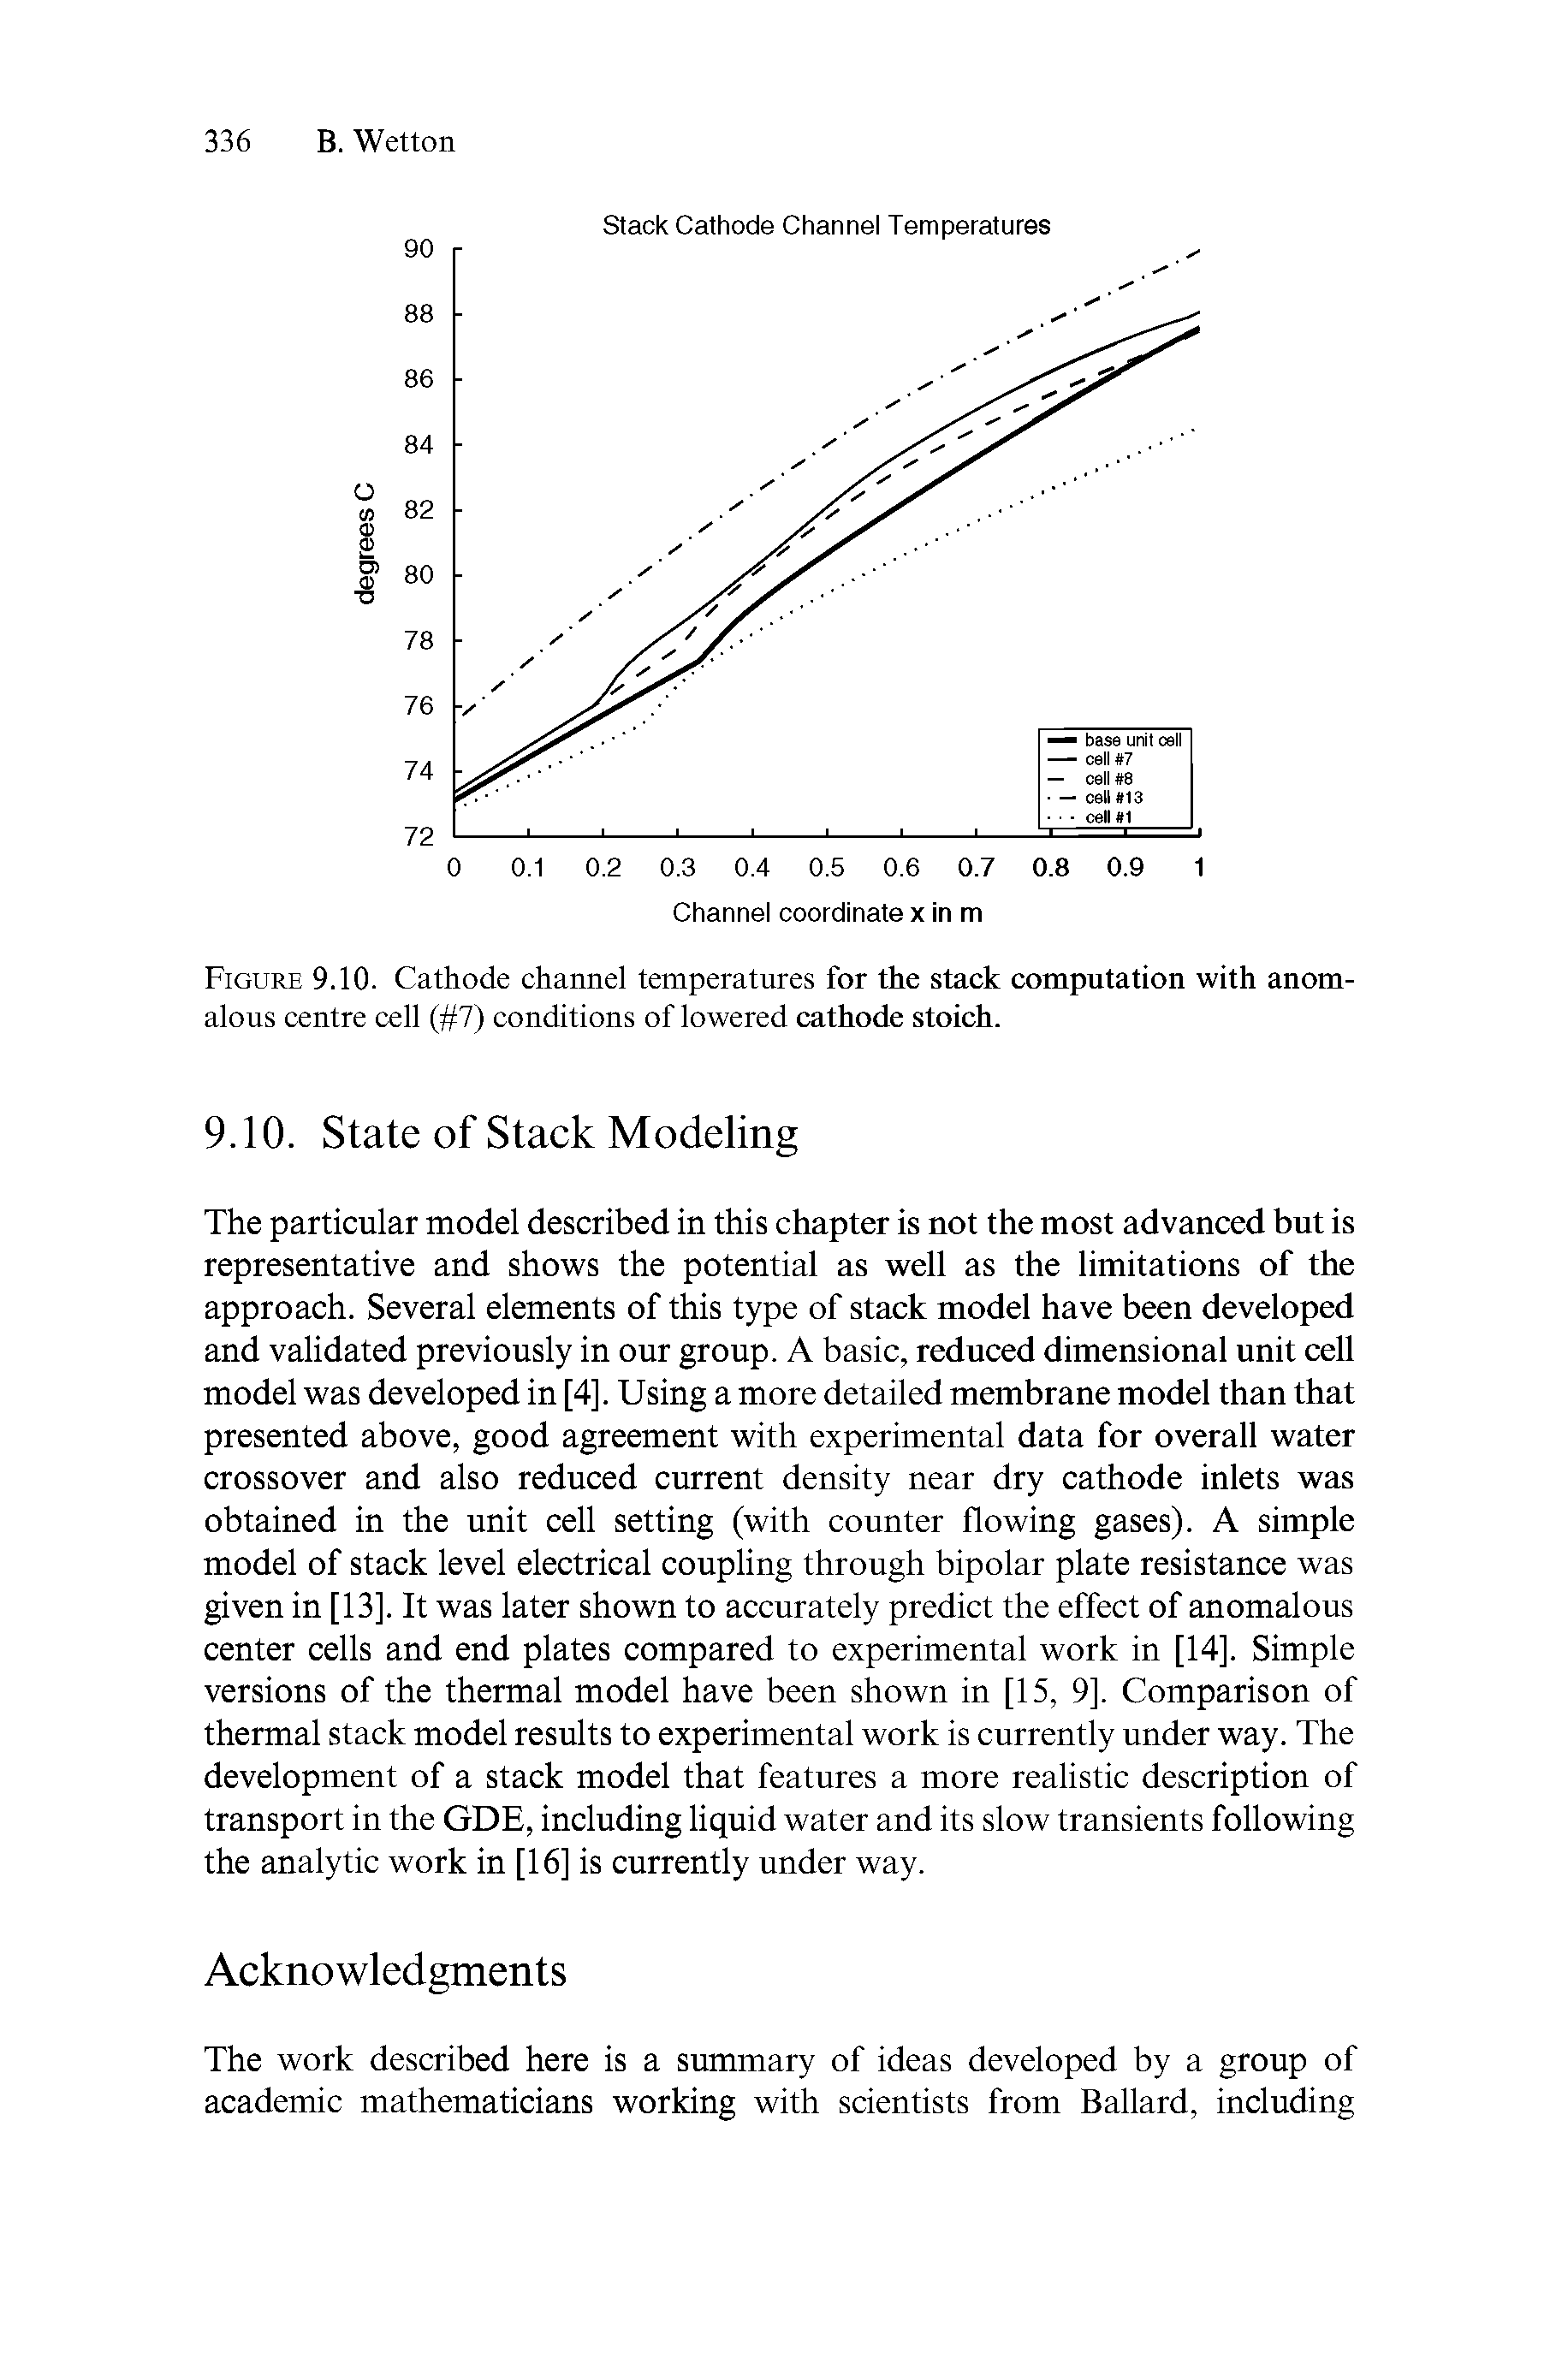 Figure 9.10. Cathode channel temperatures for the stack computation with anomalous centre cell ( 7) conditions of lowered cathode stoich.